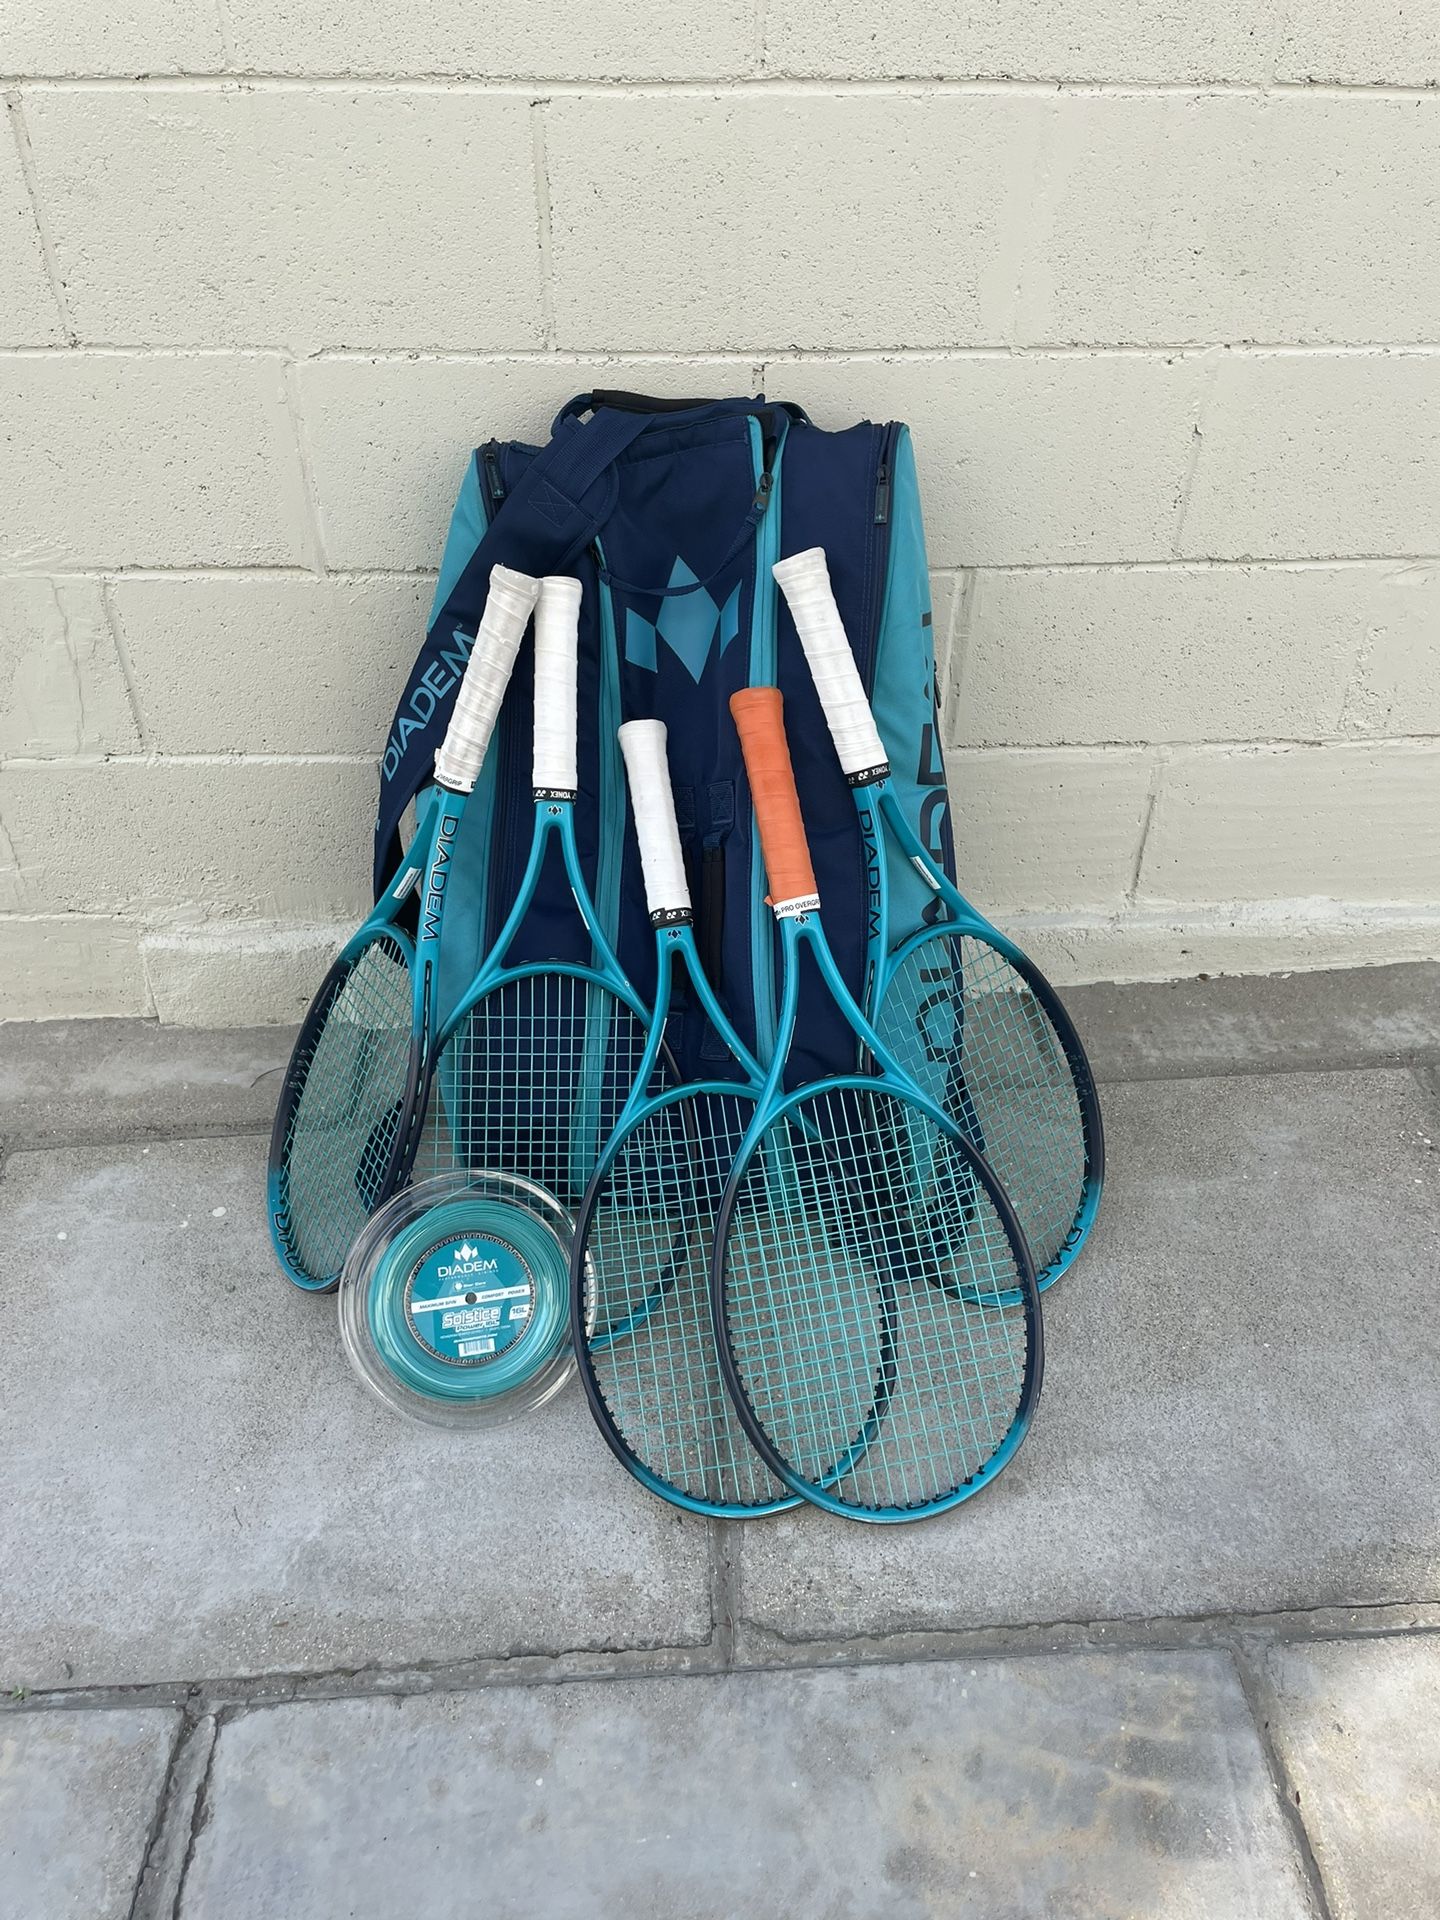 New Diadem Tennis Package With Bags Rackets And Strings!!!